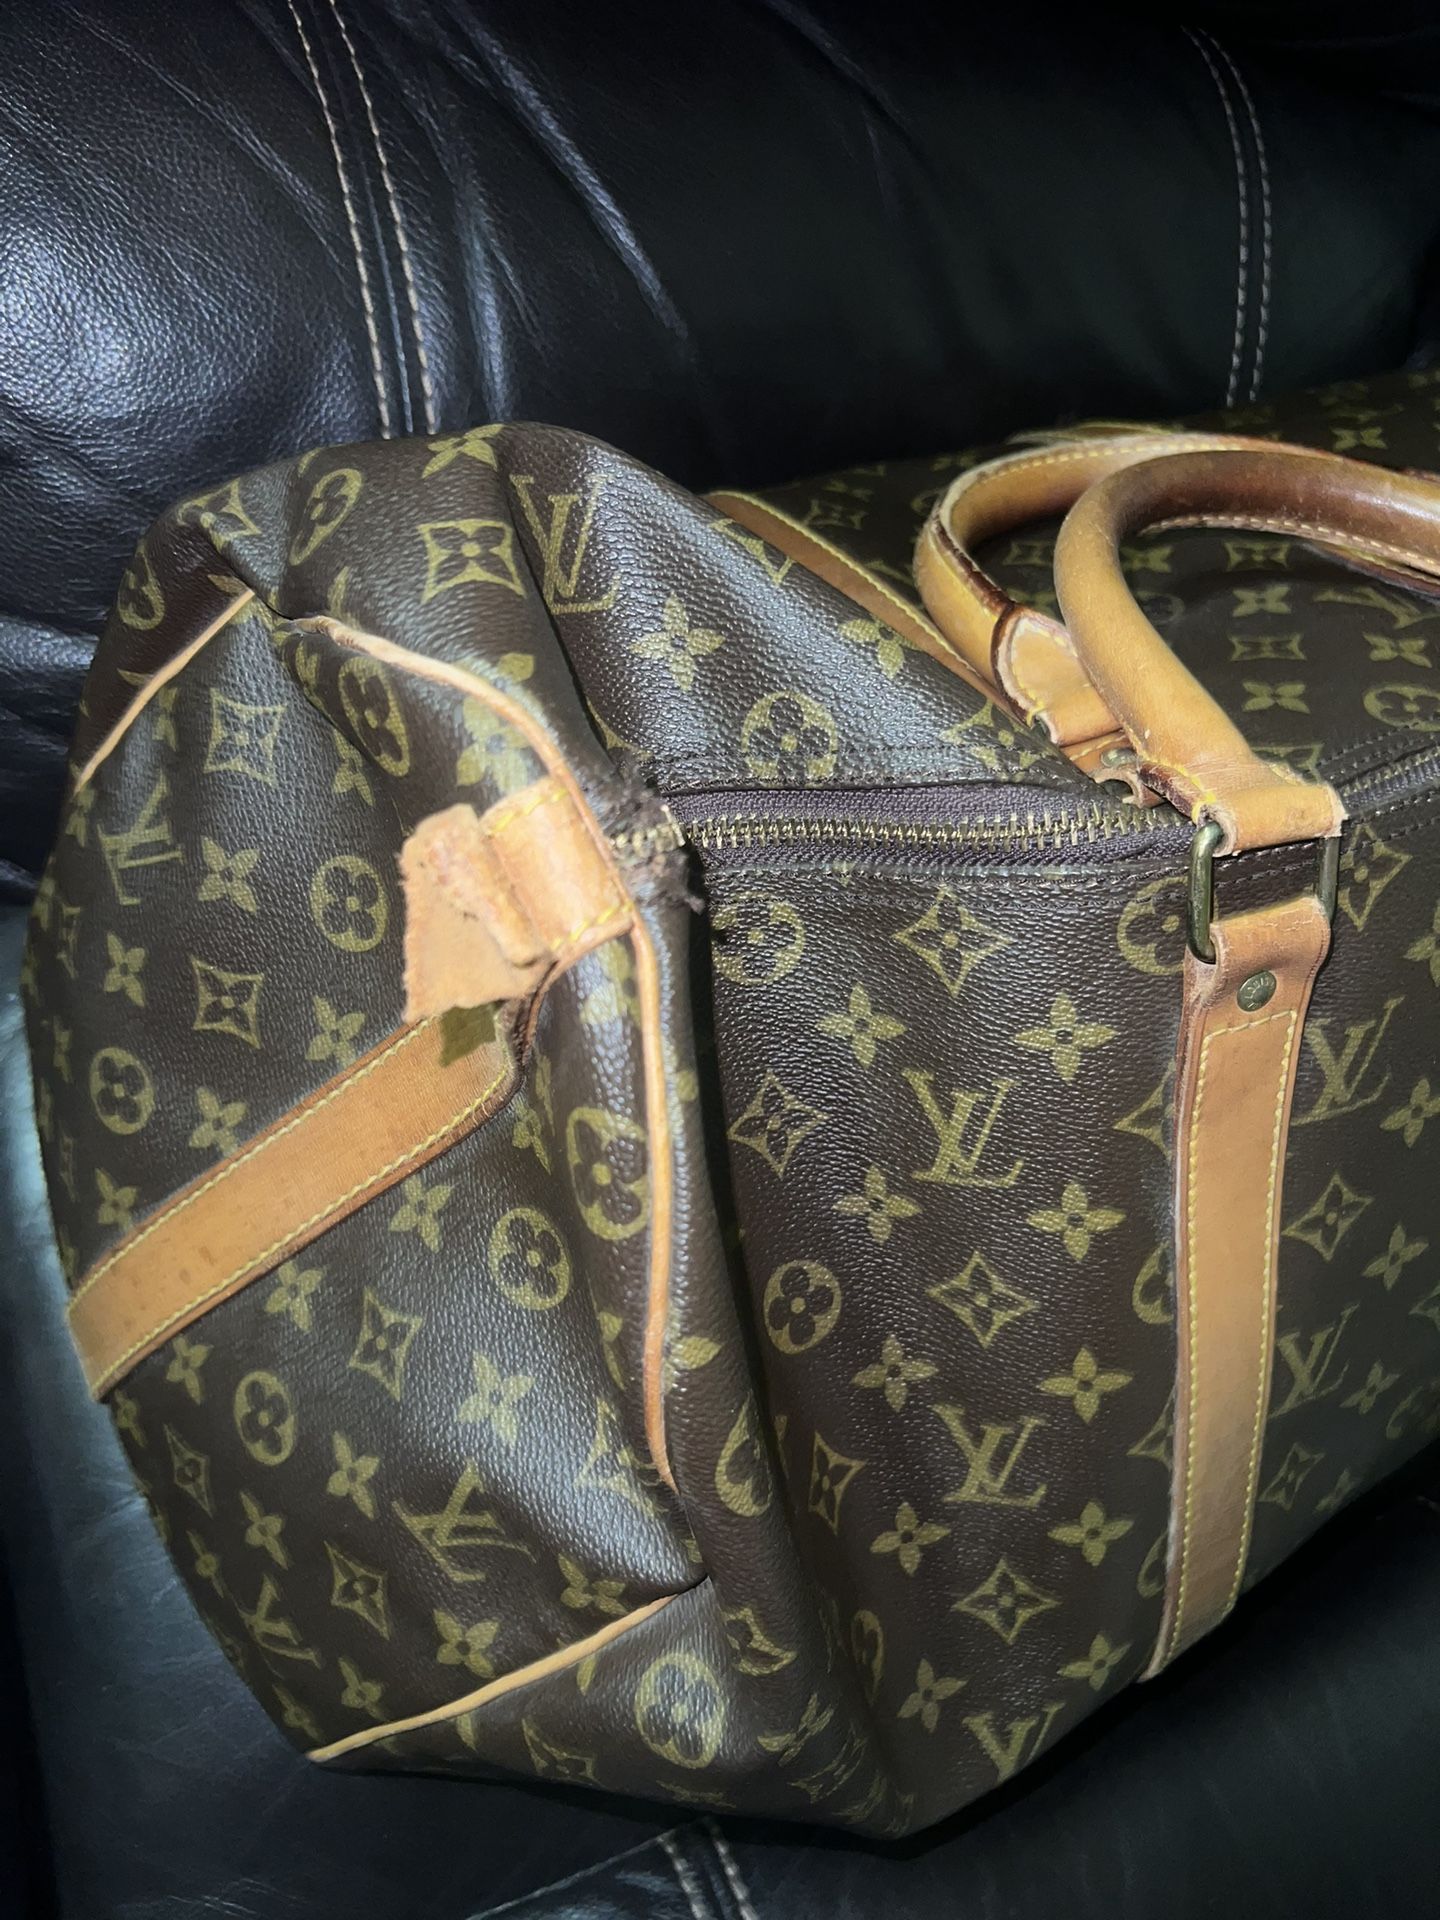 Used Louis Vuitton Duffle Bag $600 in store now